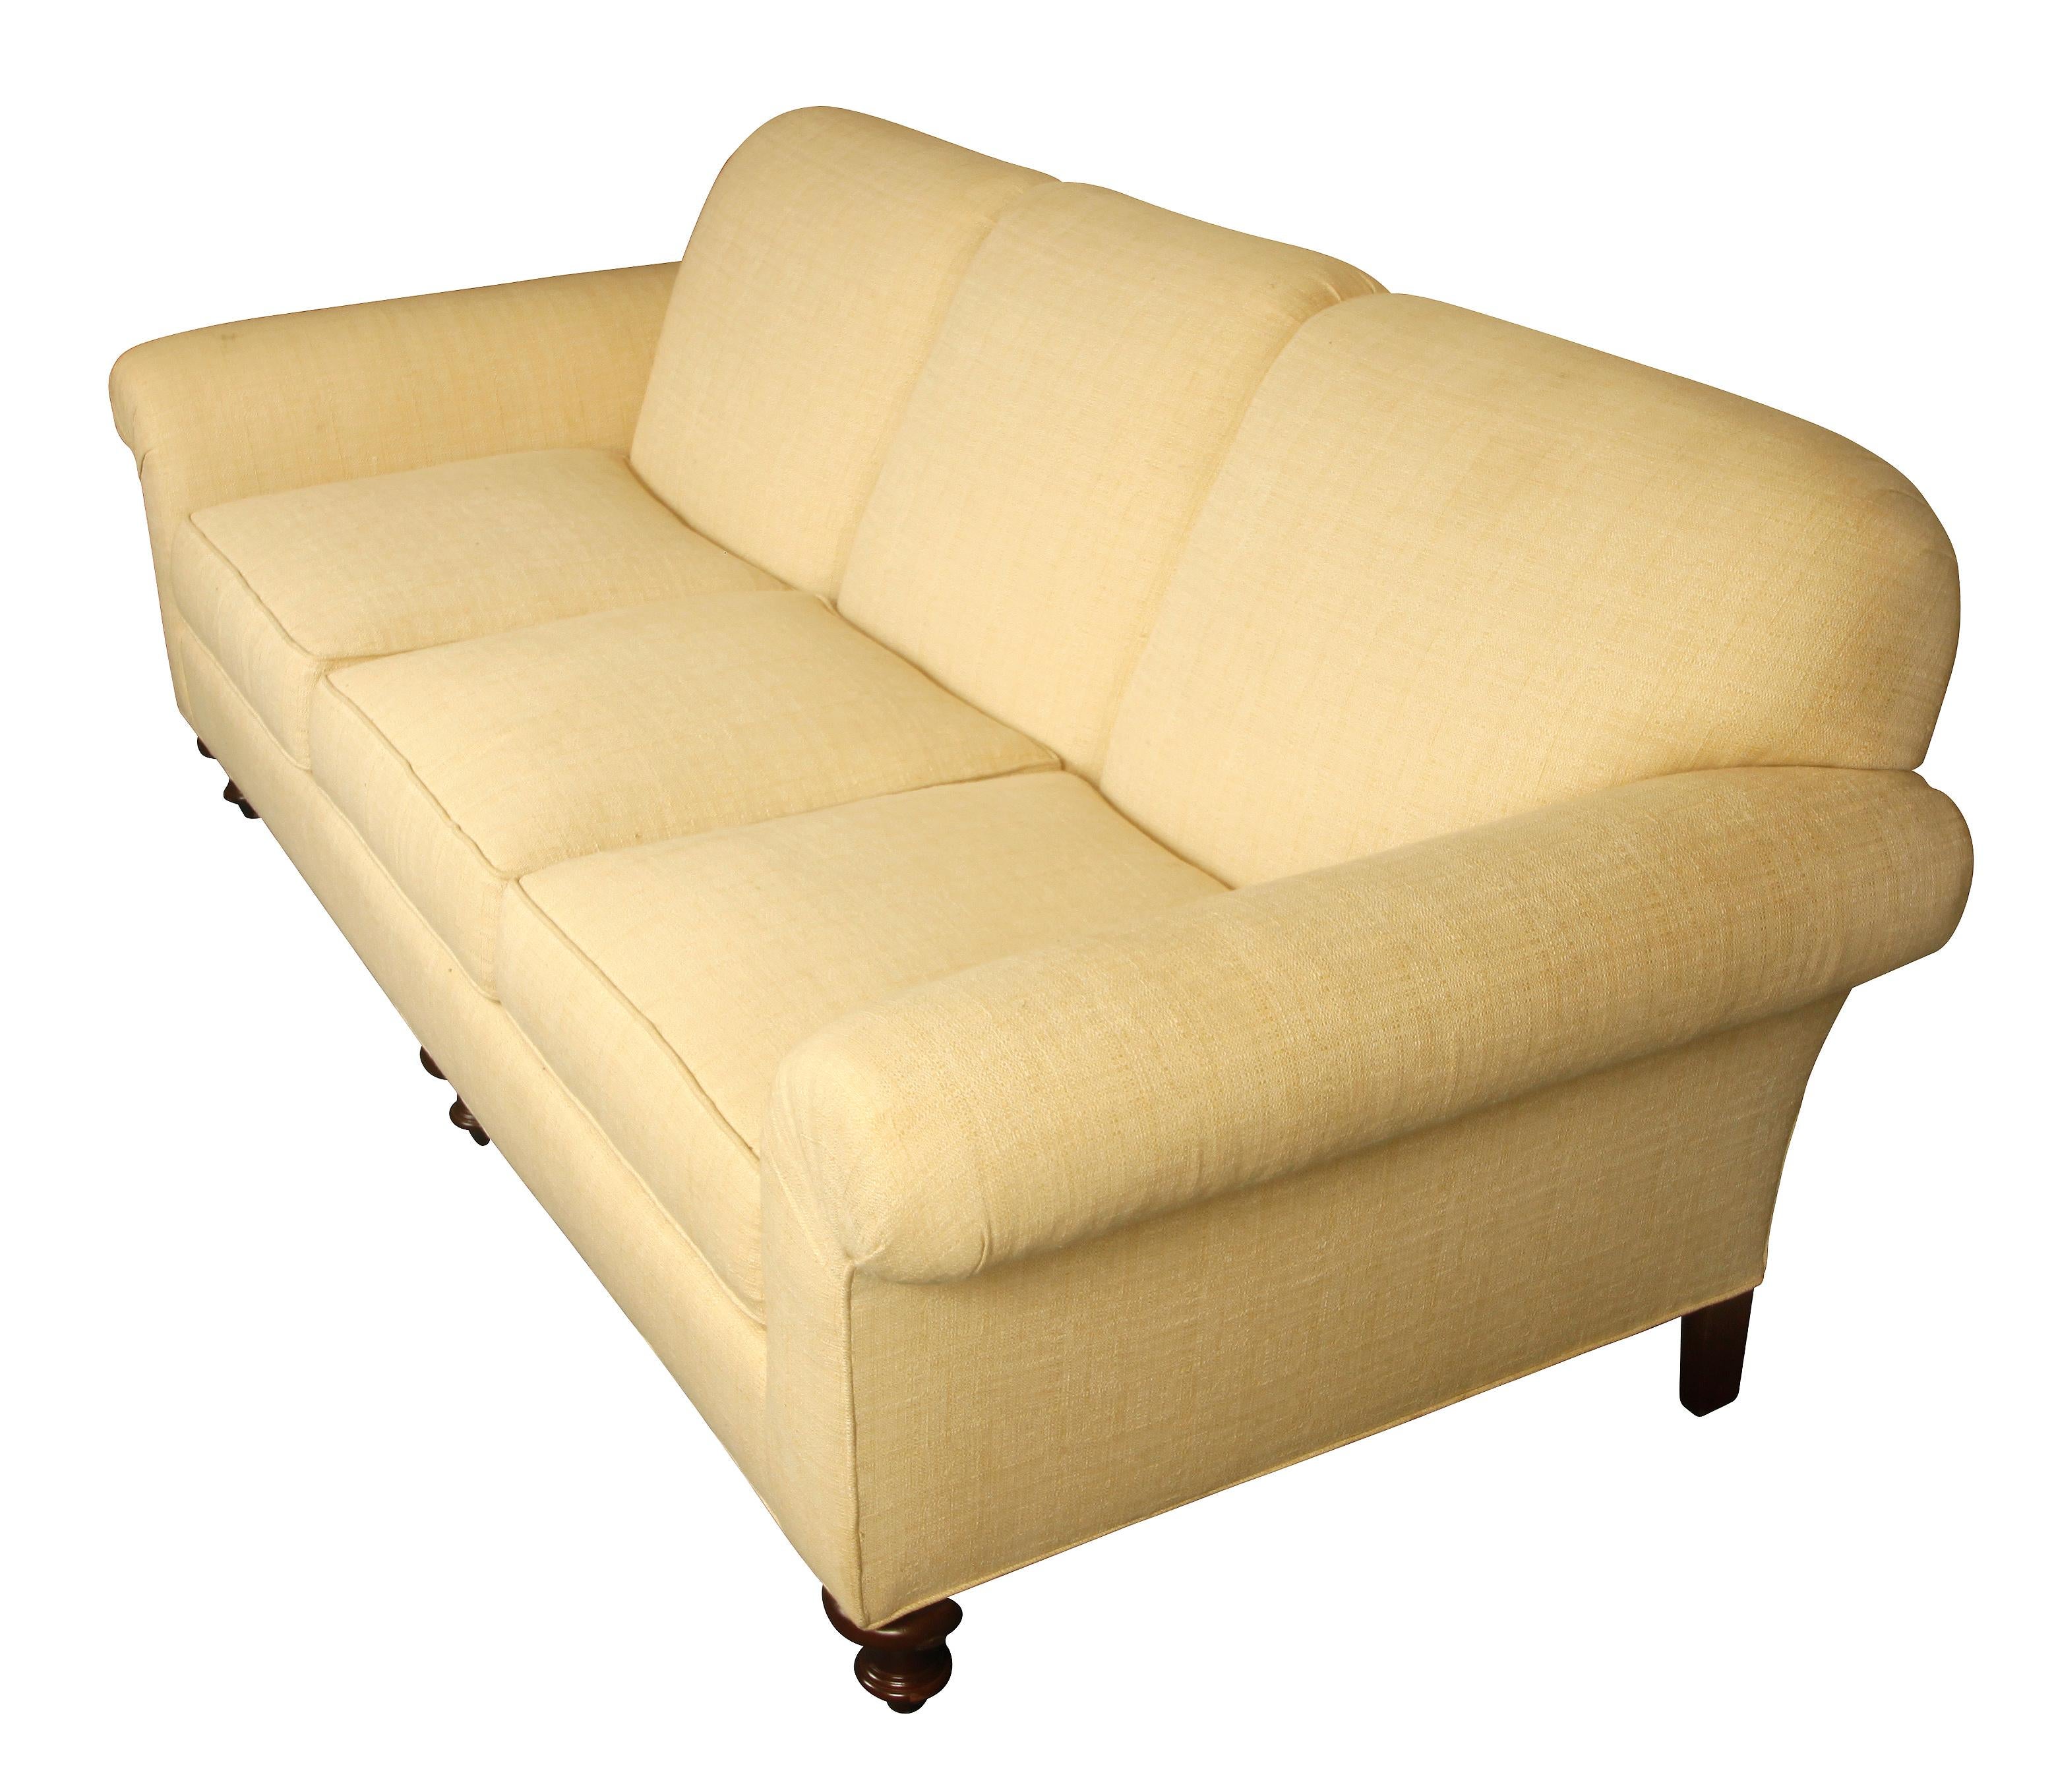 Custom cotton, upholstered roll arm sofa in cream linen with rounded wood feet. Classic piece, comfortably seats three with removable cushions.